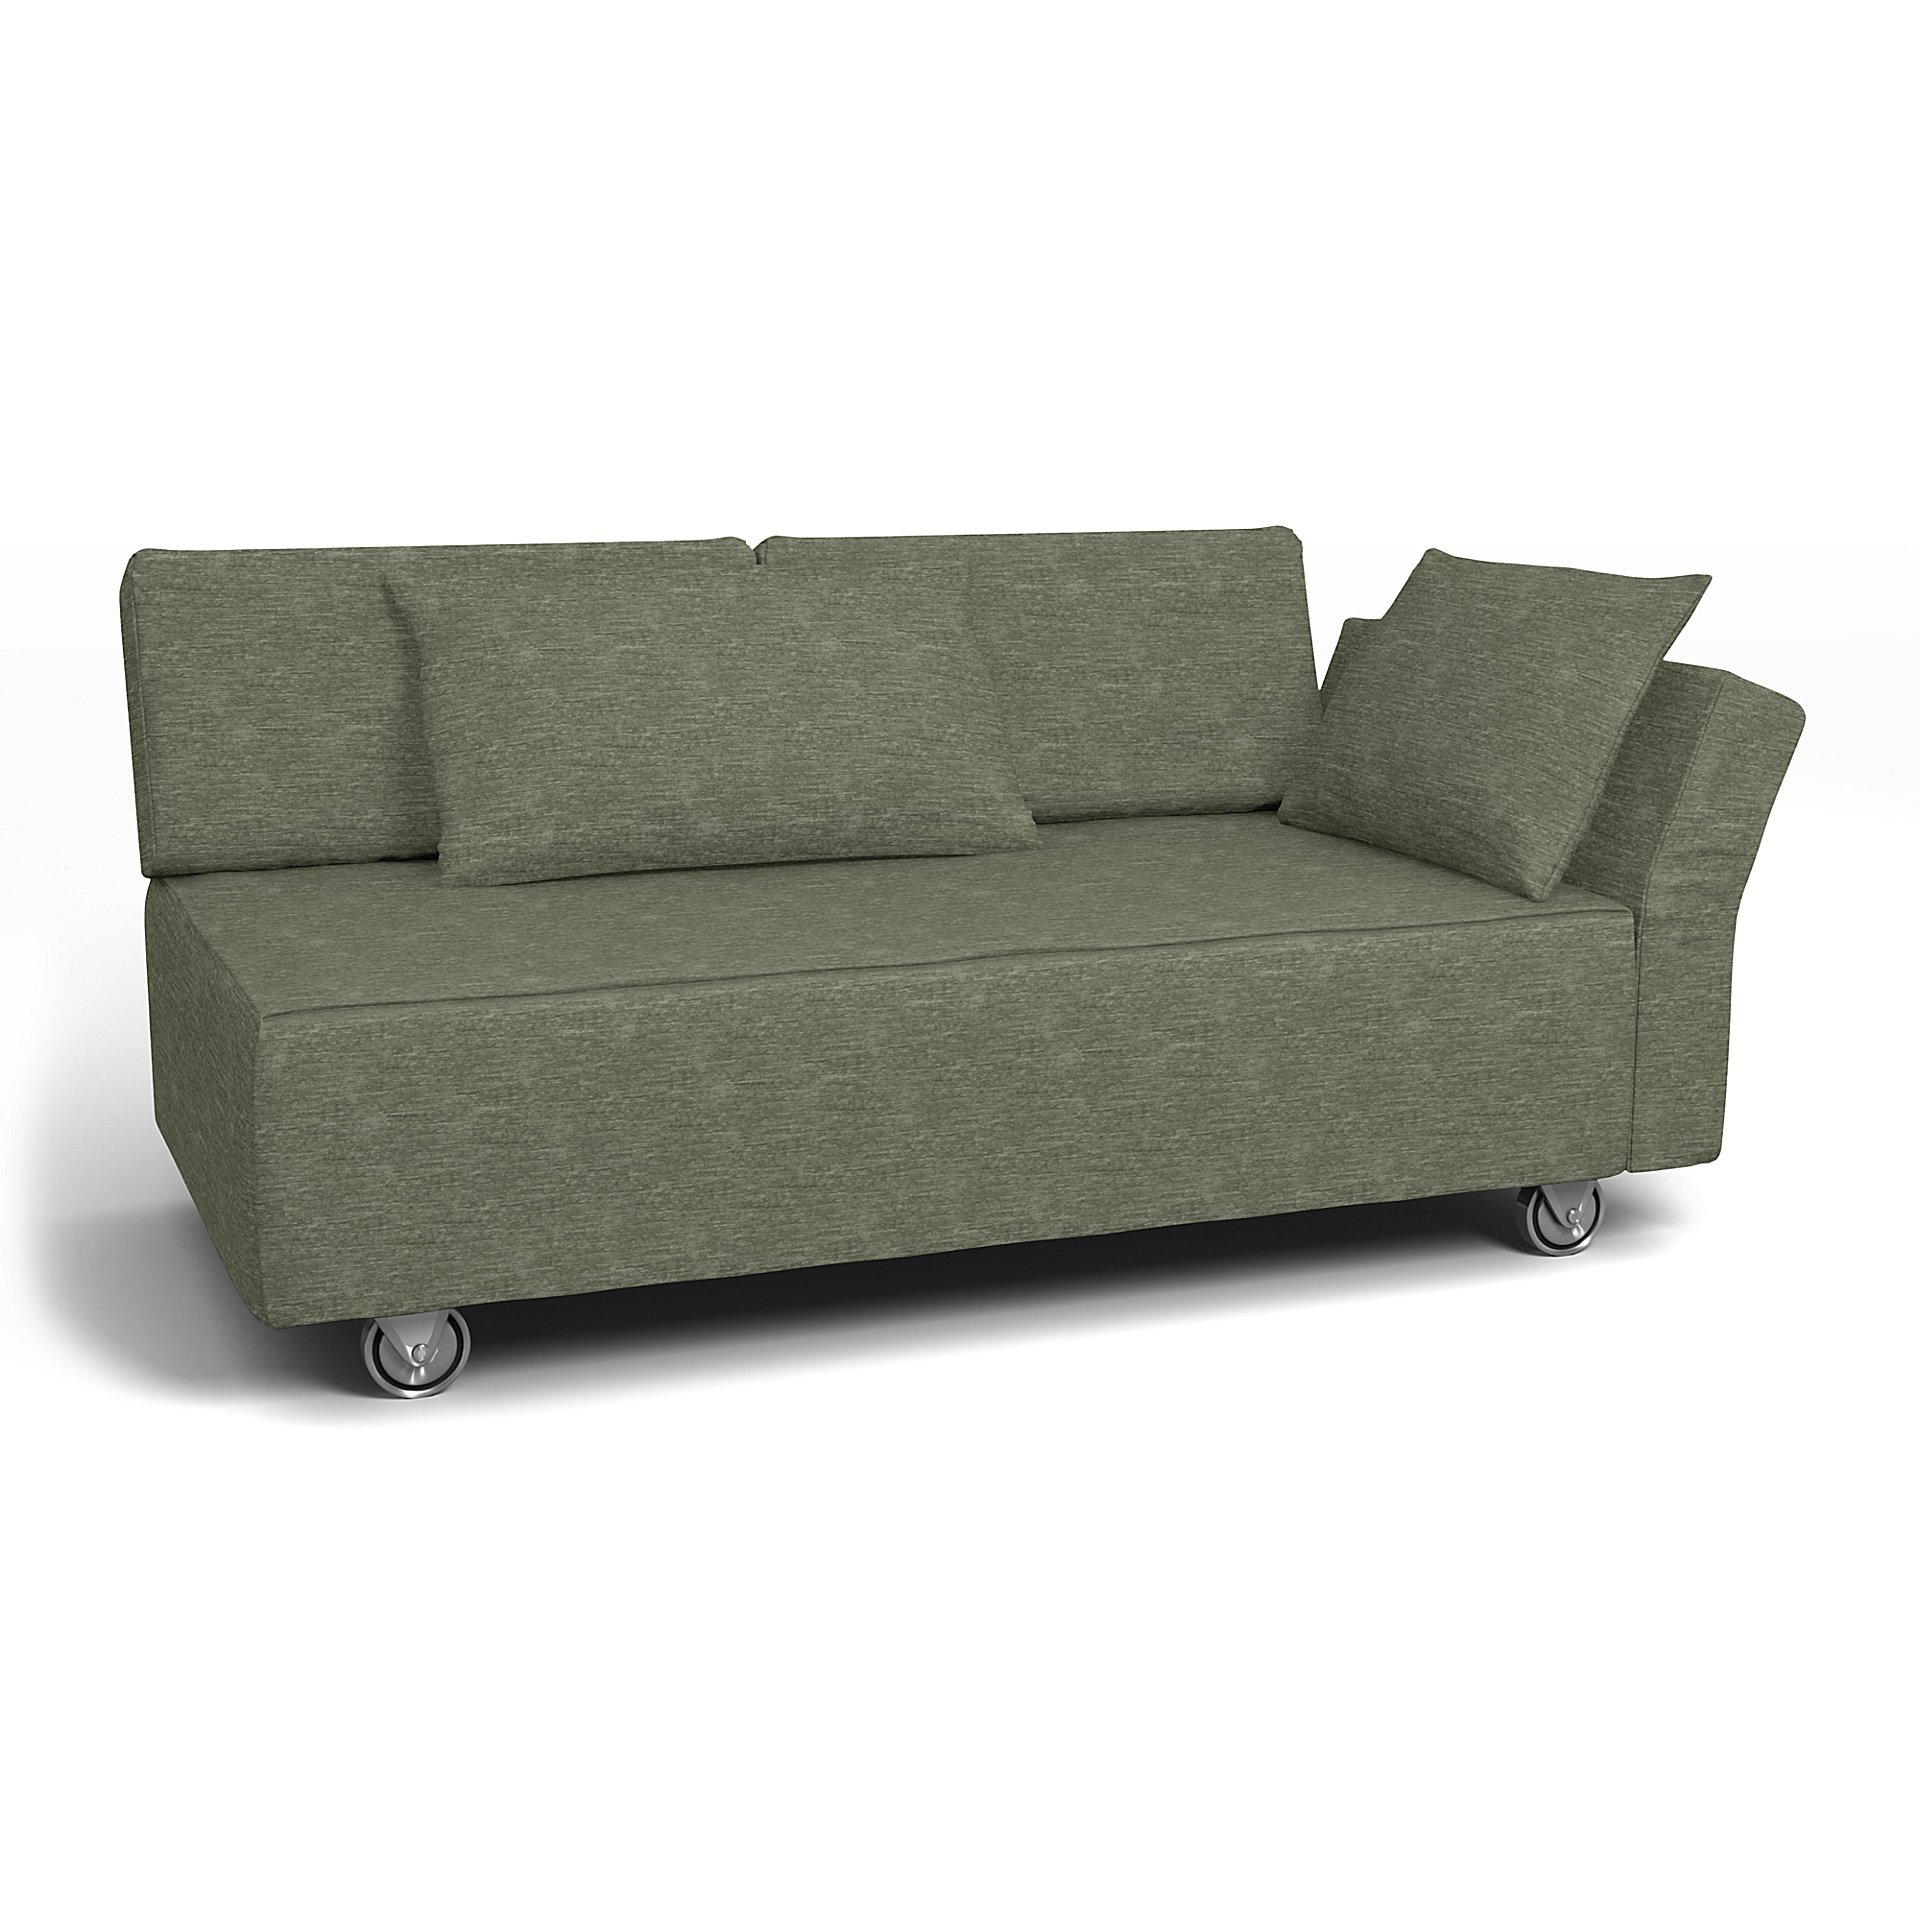 IKEA - Falsterbo 2 Seat Sofa with Right Arm Cover, Green Grey, Velvet - Bemz